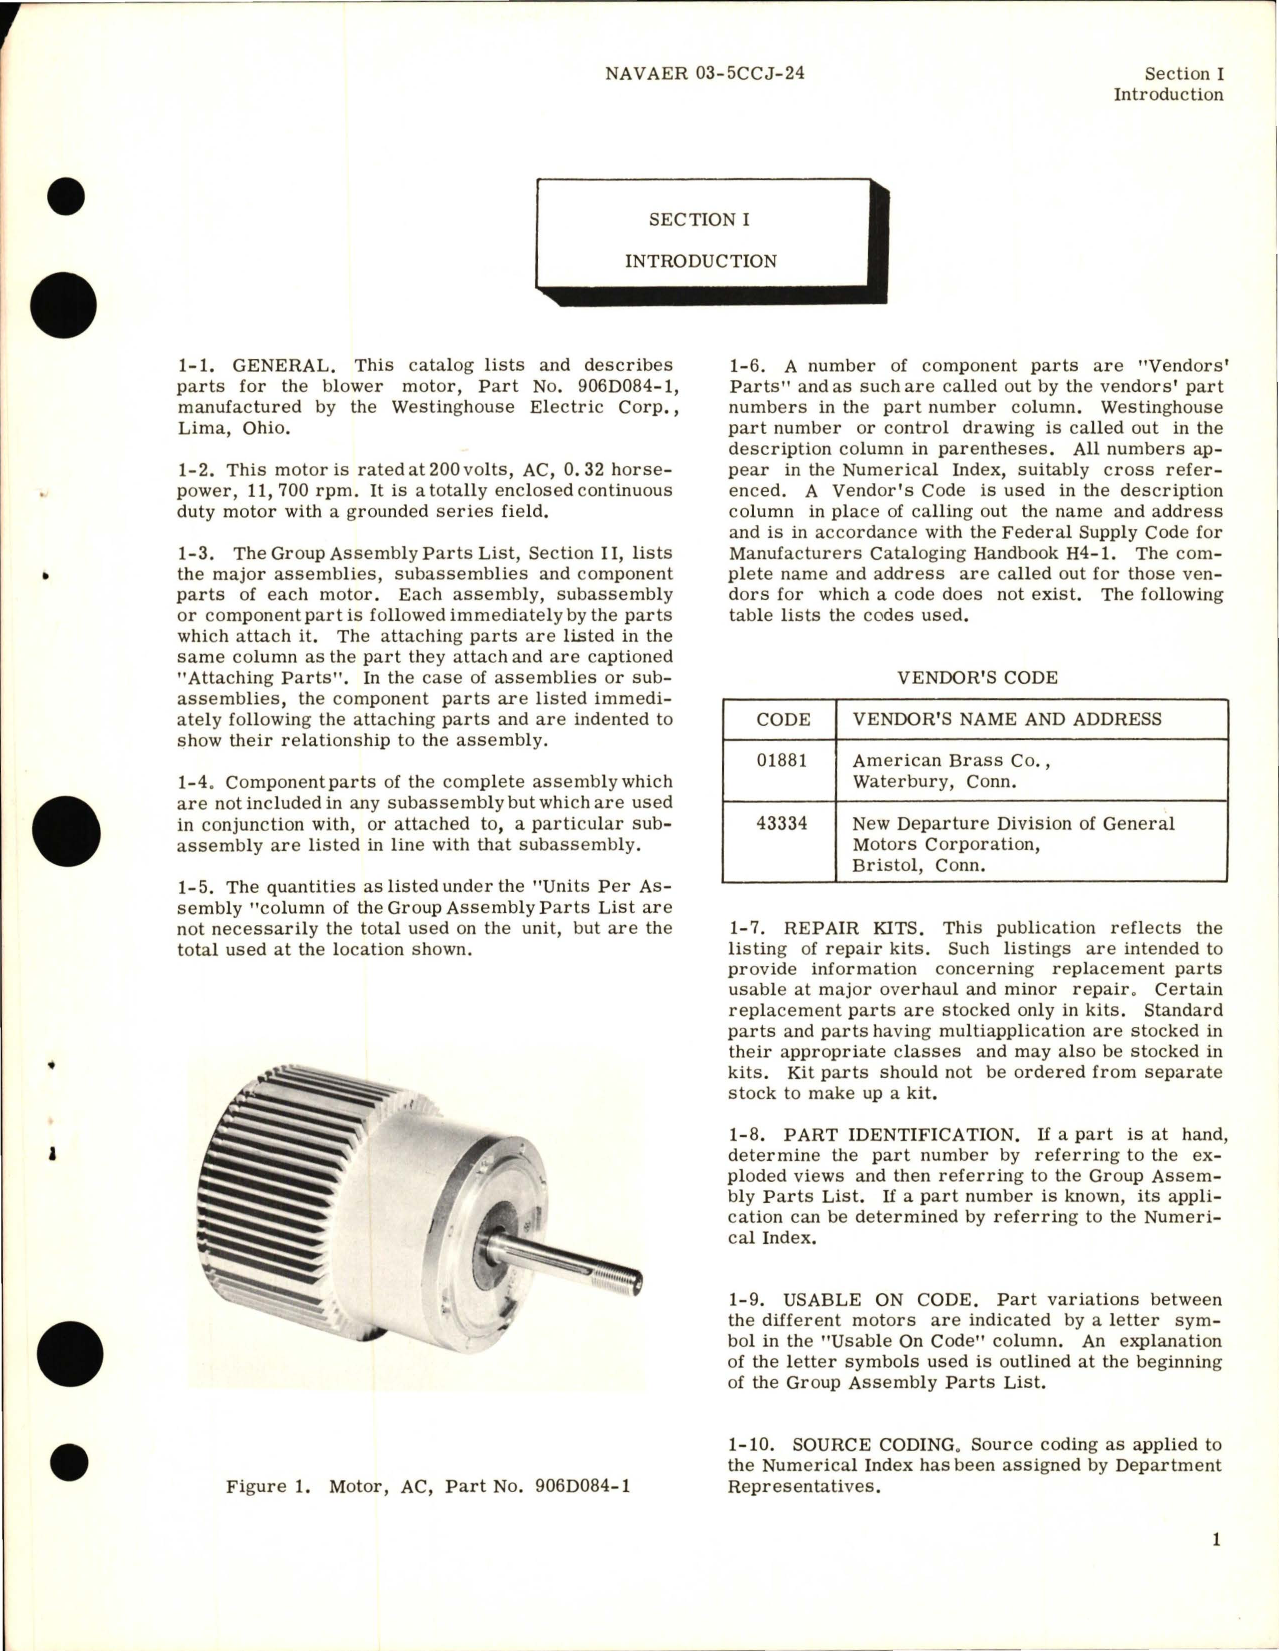 Sample page 5 from AirCorps Library document: Illustrated Parts Breakdown for AC Motor - Part 906D084-1